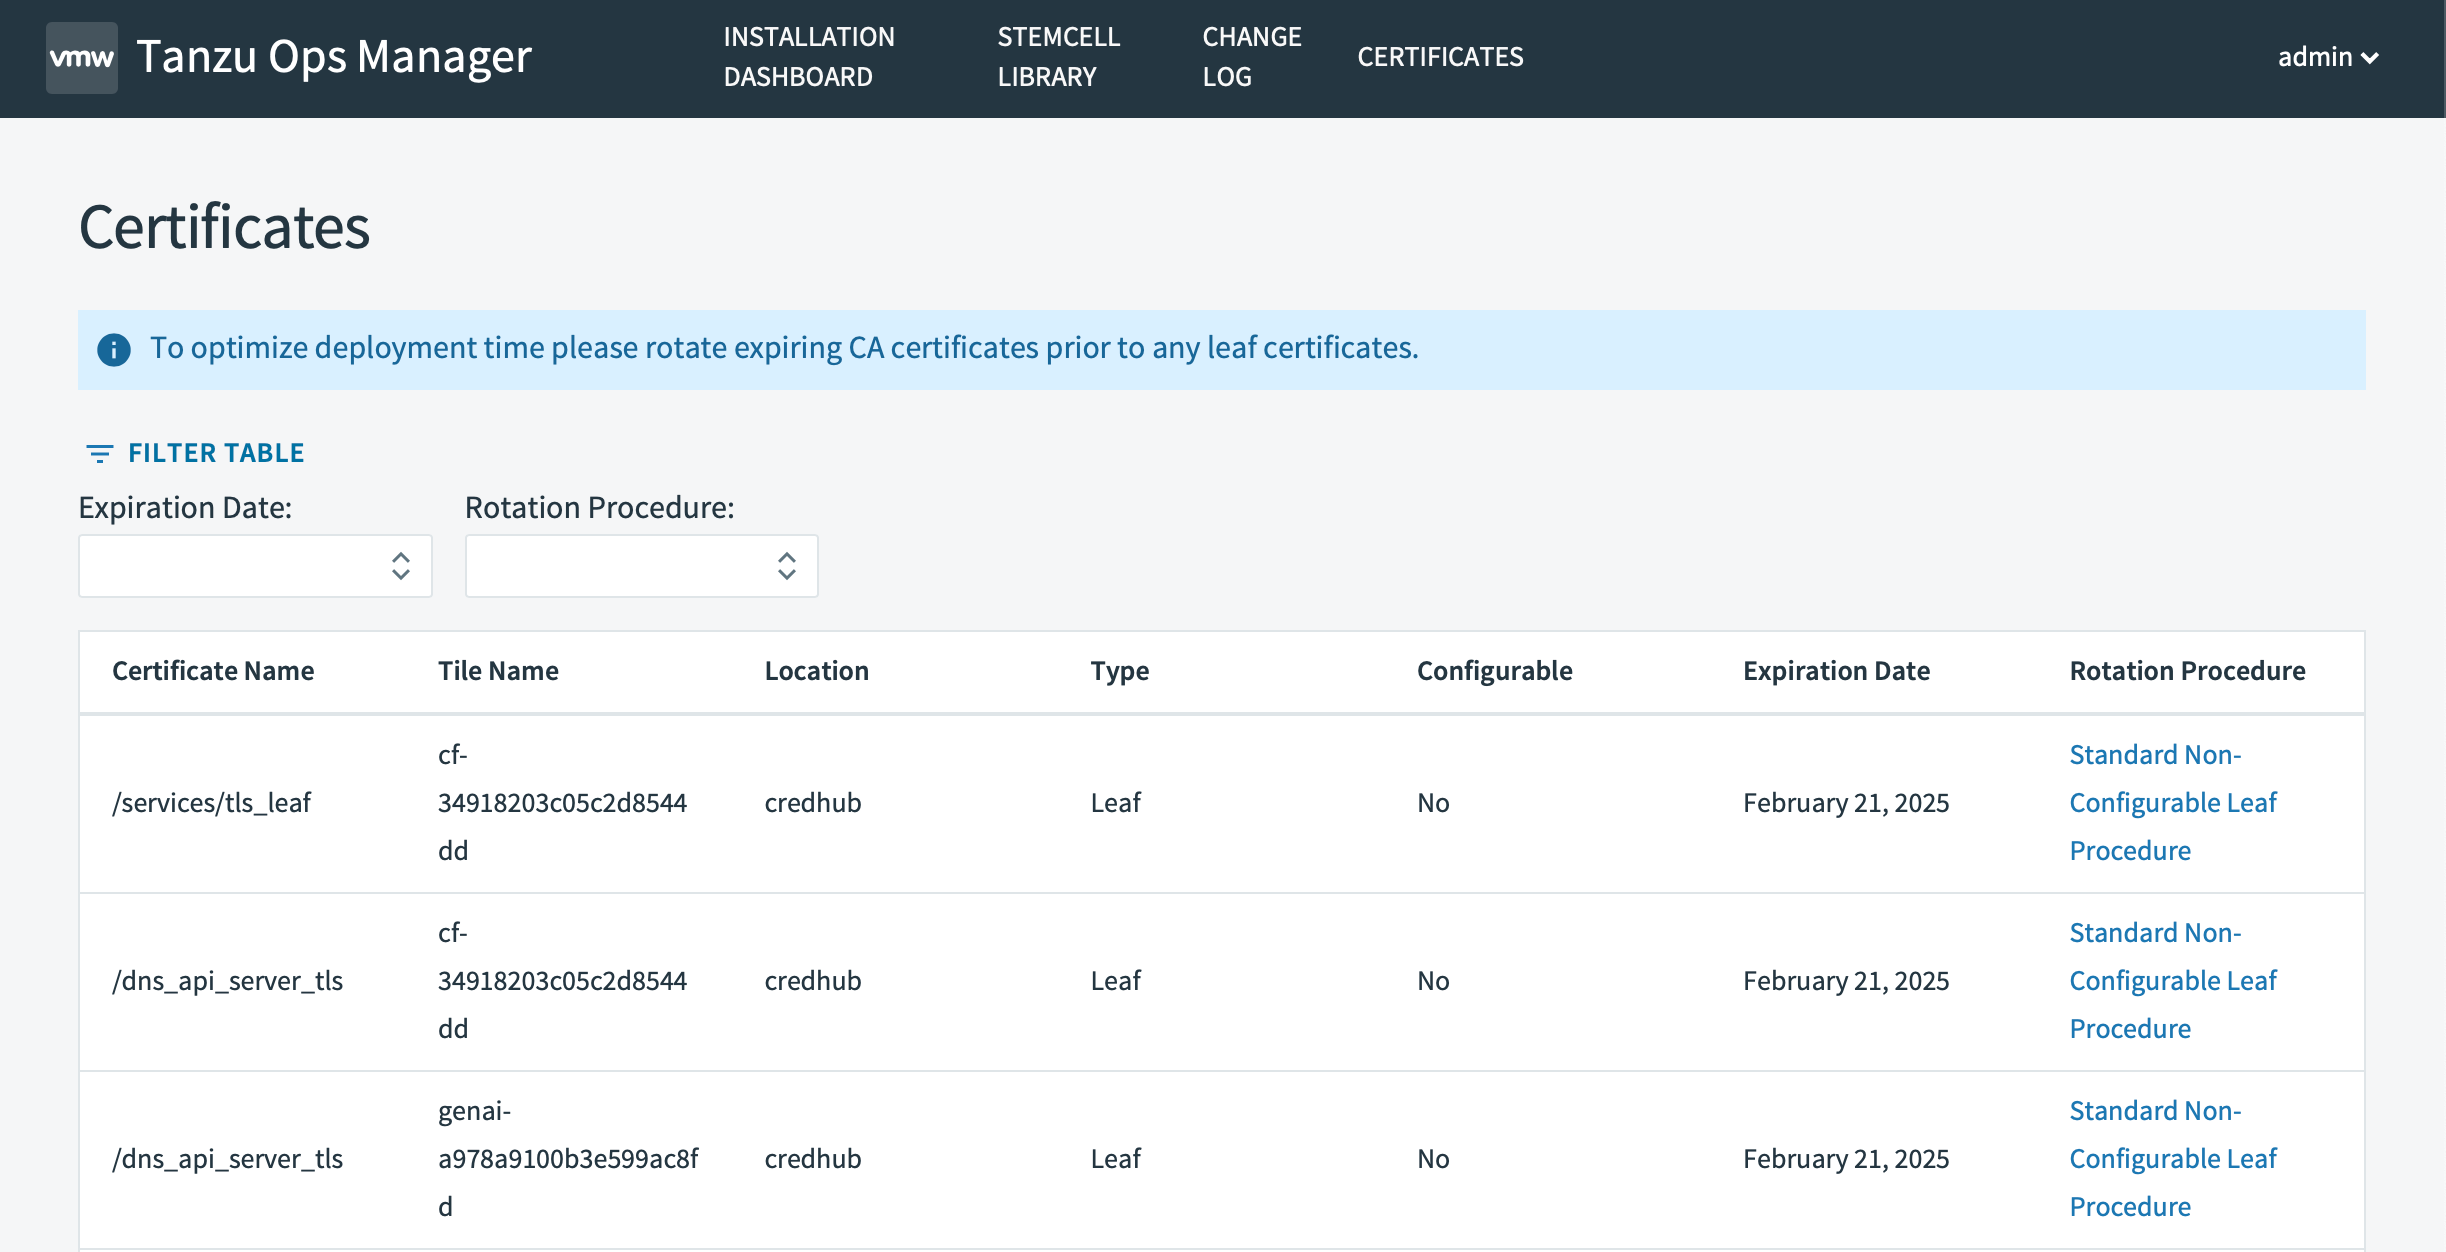 The Certificates page shows information in the following columns: Certificate name, Tile Name, Location, Type, Configurable, Expiration Date, and Rotation Procedure.